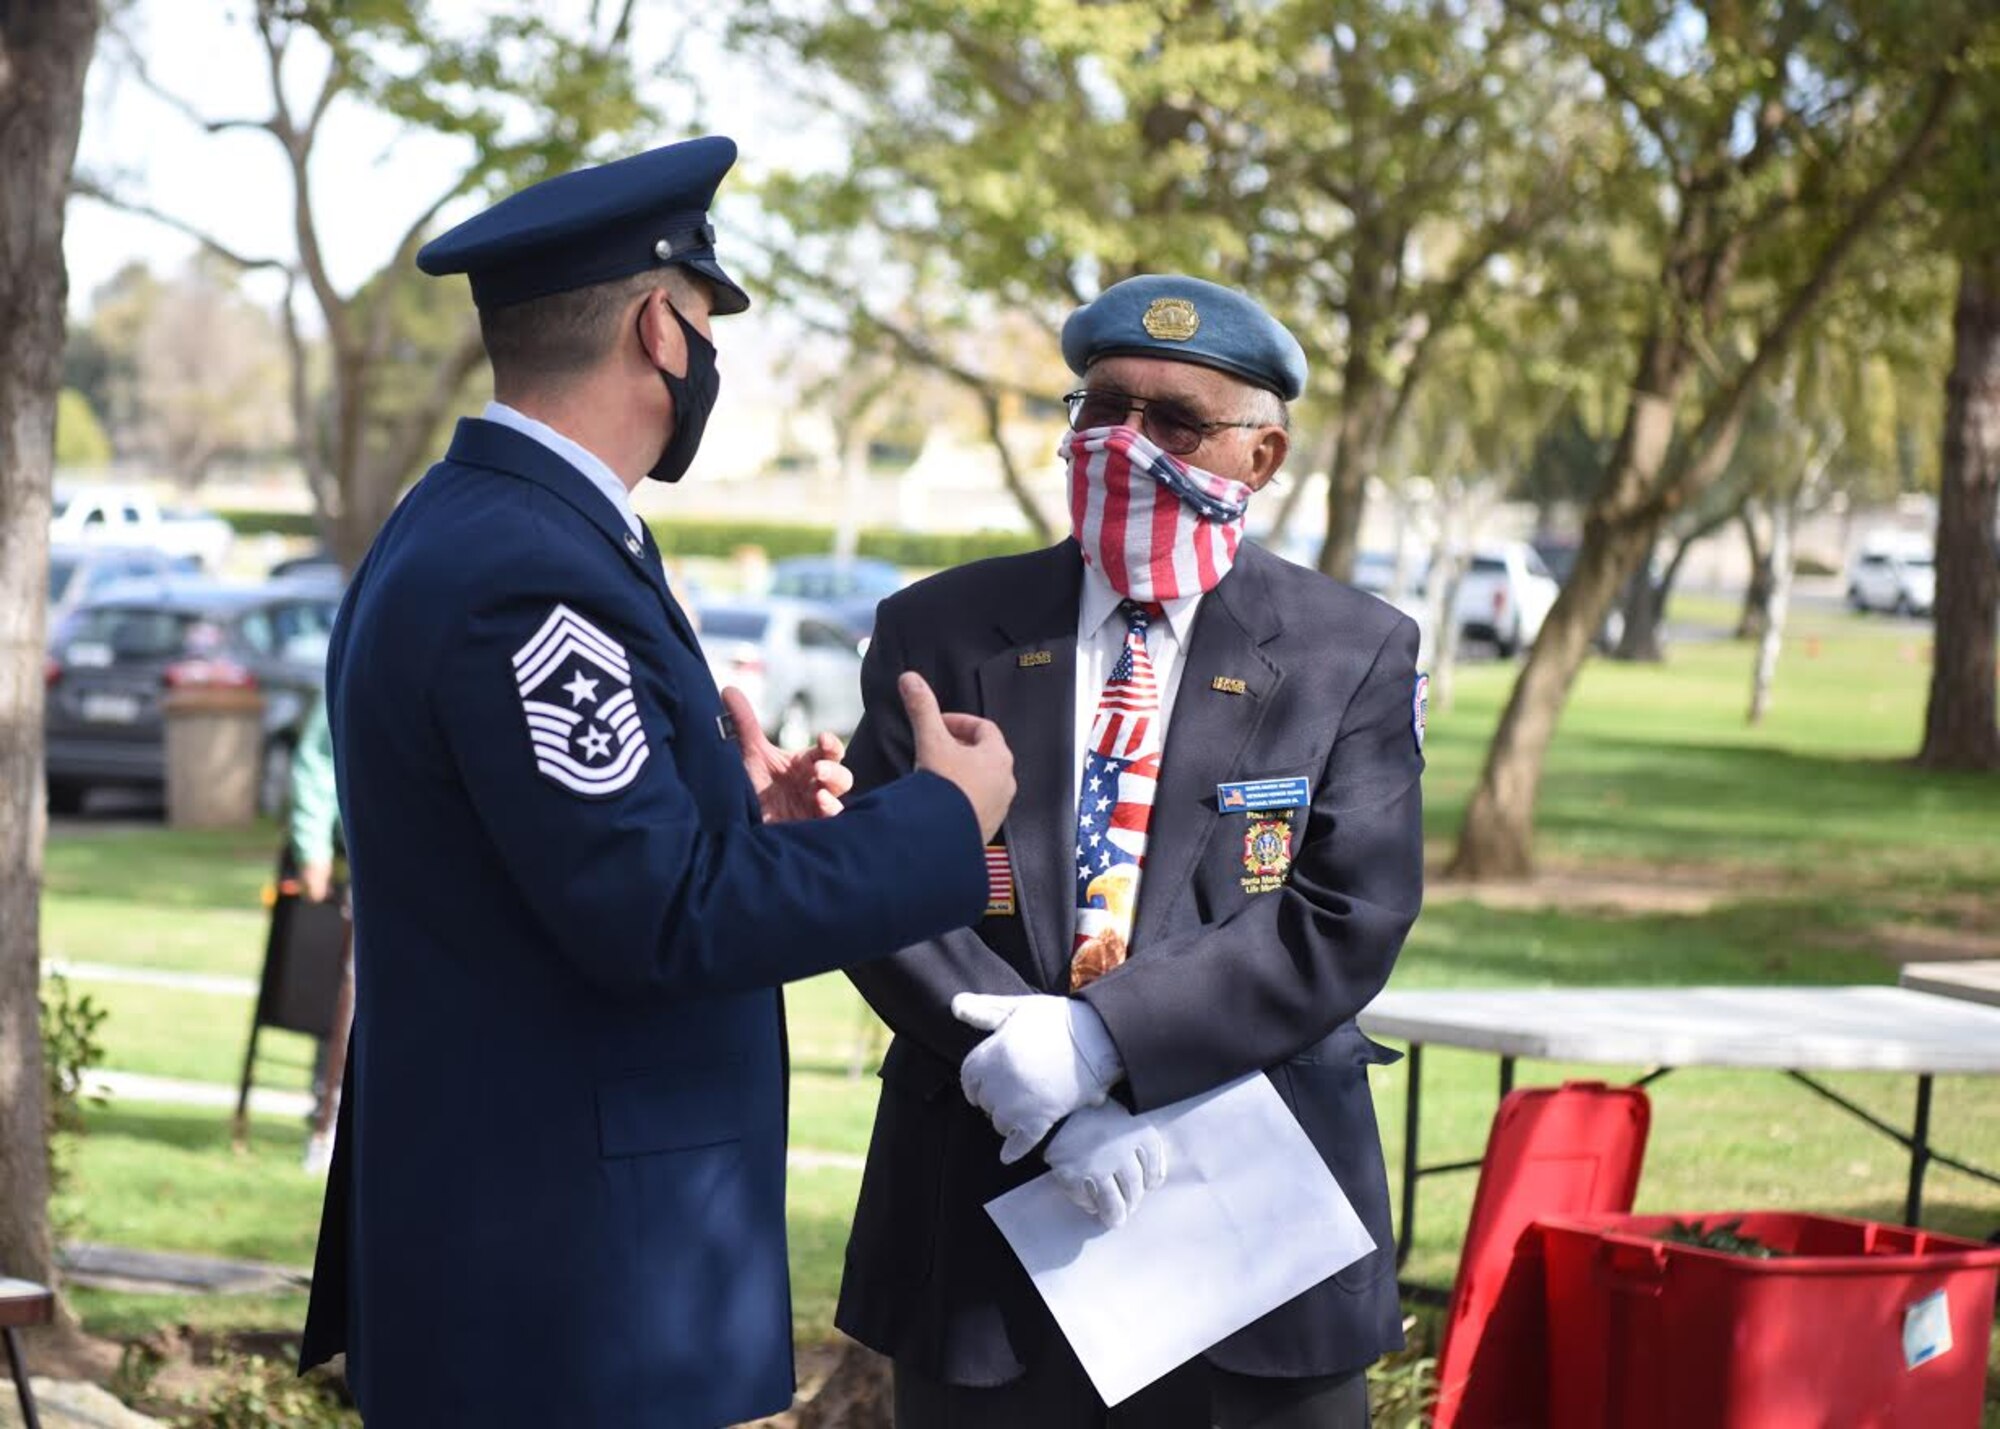 Chief Master Sgt. Jason Delucy, 30th Space Wing command chief, interacts with event organizers during a Veterans Day ceremony Nov. 11, 2020, in Santa Maria, Calif. Congress passed a resolution in 1926 for an annual observance to be celebrated for Veterans Day, and November 11th became a national holiday in 1938. Veterans Day pays tribute to all American veterans, past and present. (U.S. Space Force photo by Senior Airman Hanah Abercrombie)